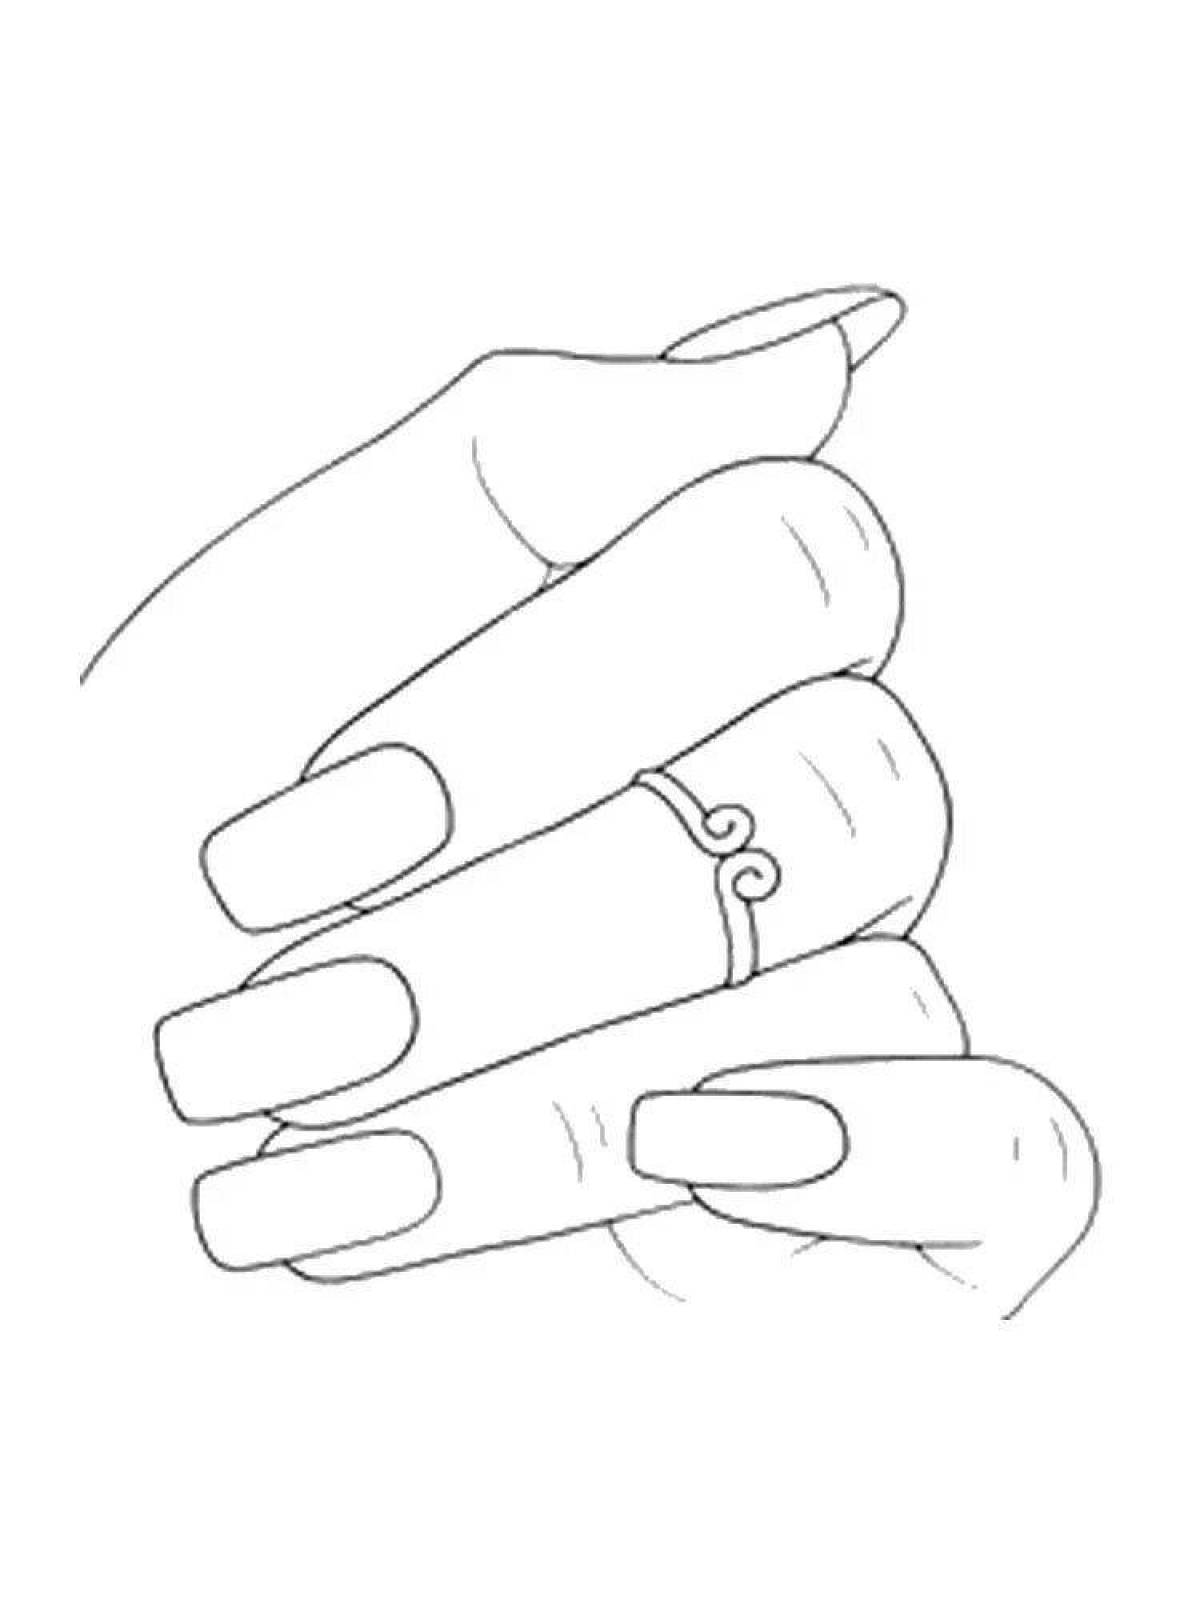 Coloring page for nails with colorful pattern